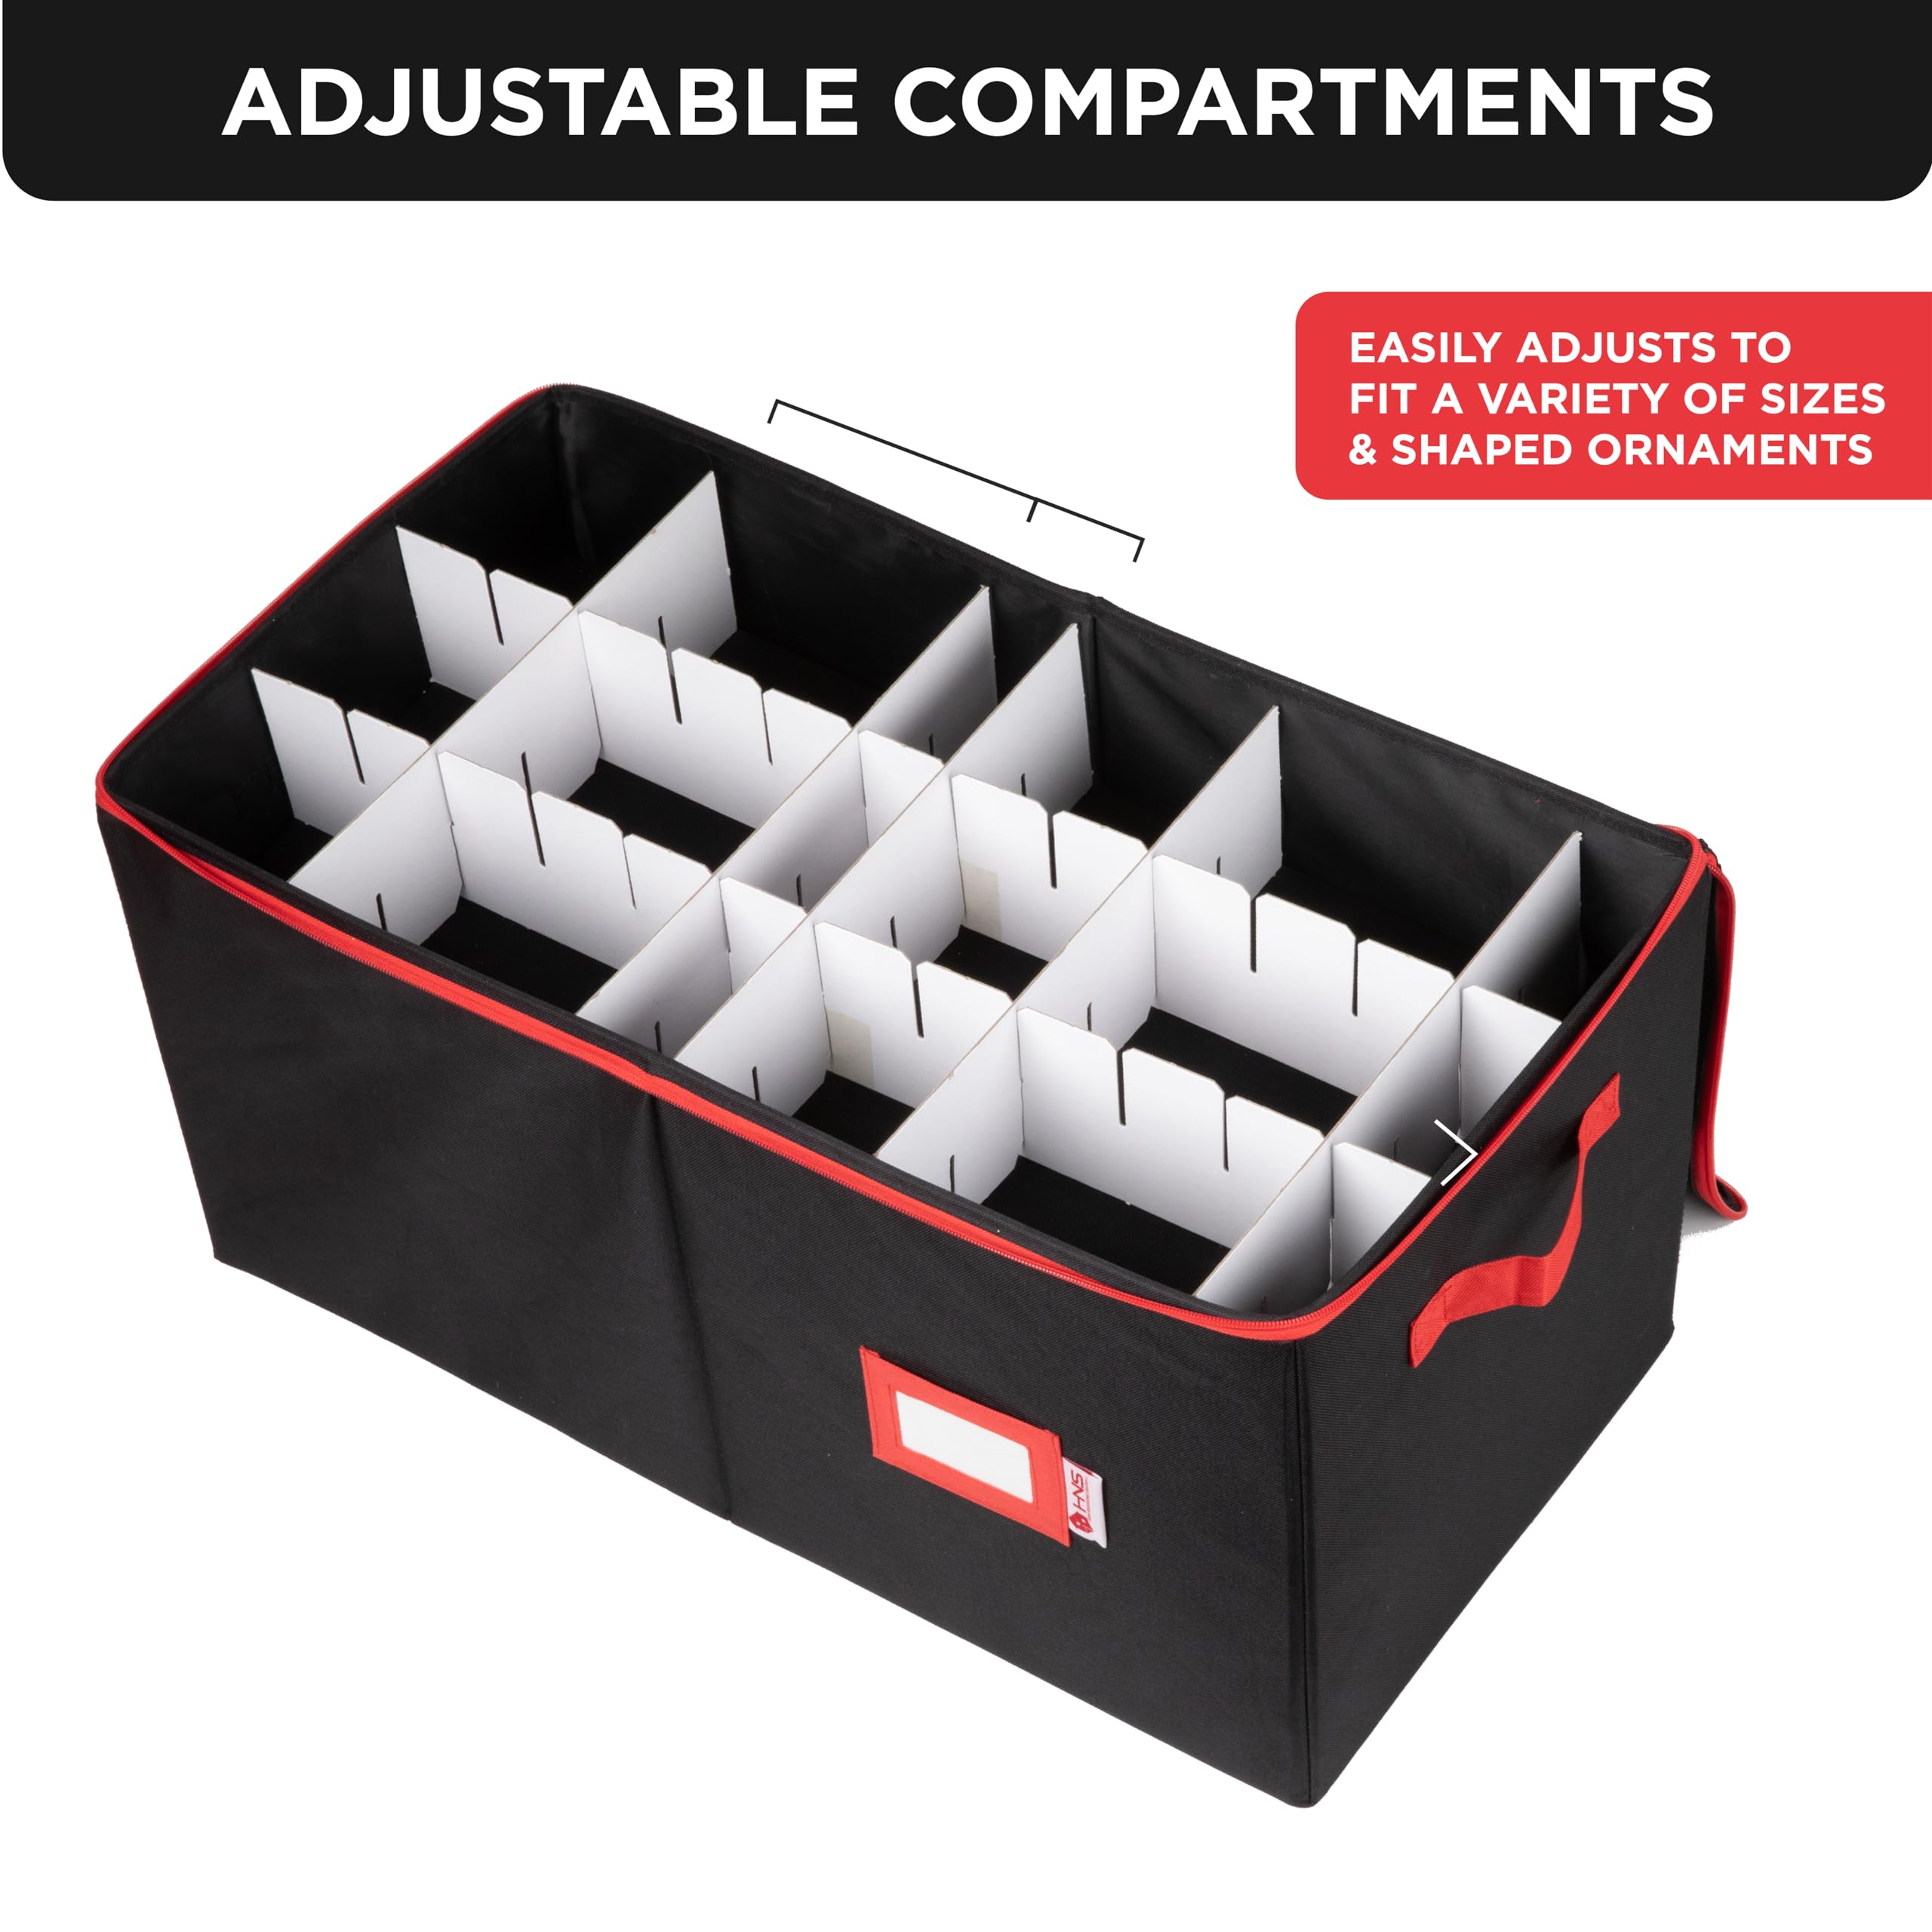 Christmas Ornament Storage Container with Dividers -Box Stores Up to 54-4" Ornaments, Zippered, Convenient, Adjustable, Heavy Duty 600D, Organizer Bin to Protect and Store Holiday Décor  - Acceptable